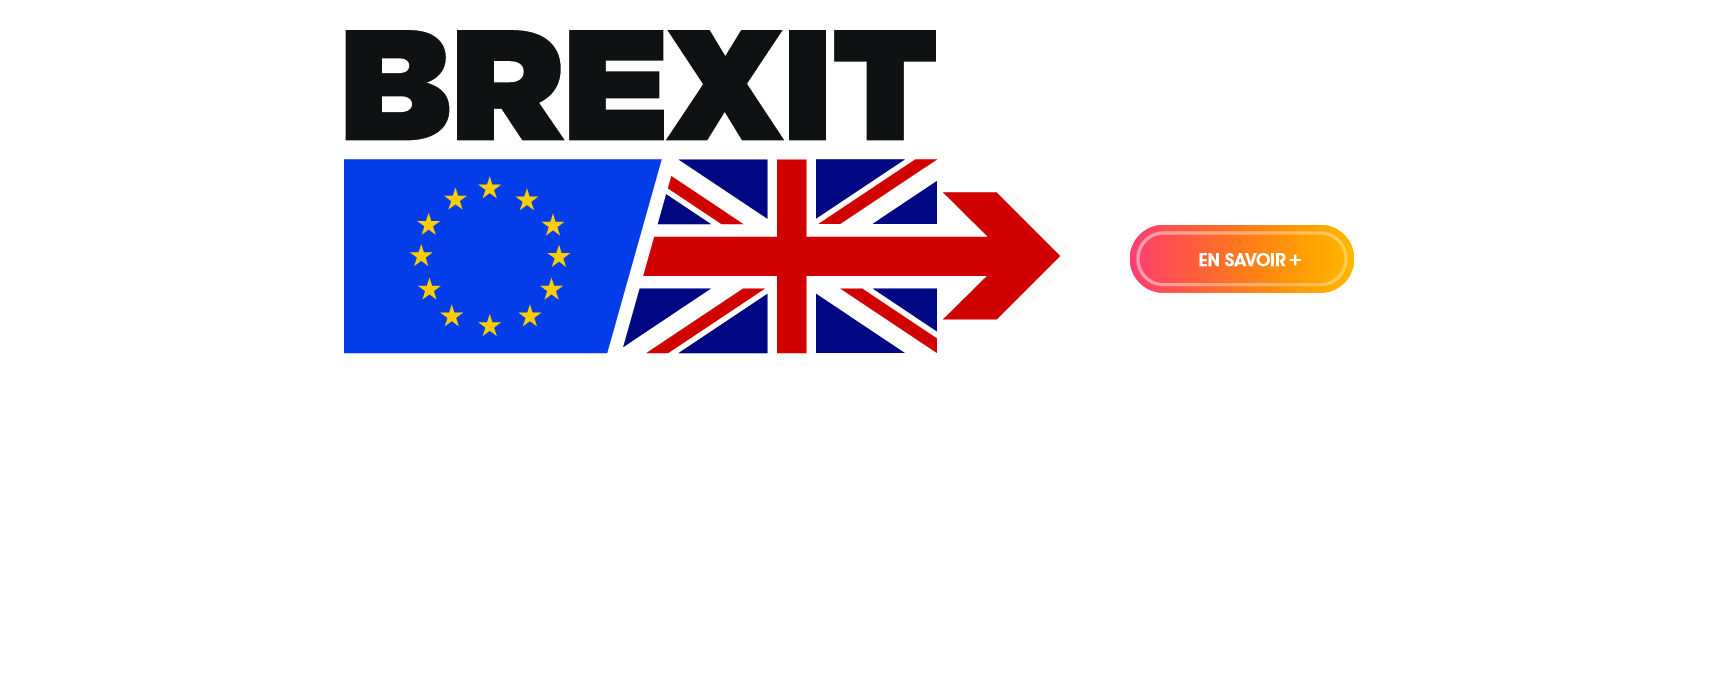 My Brexit Solution